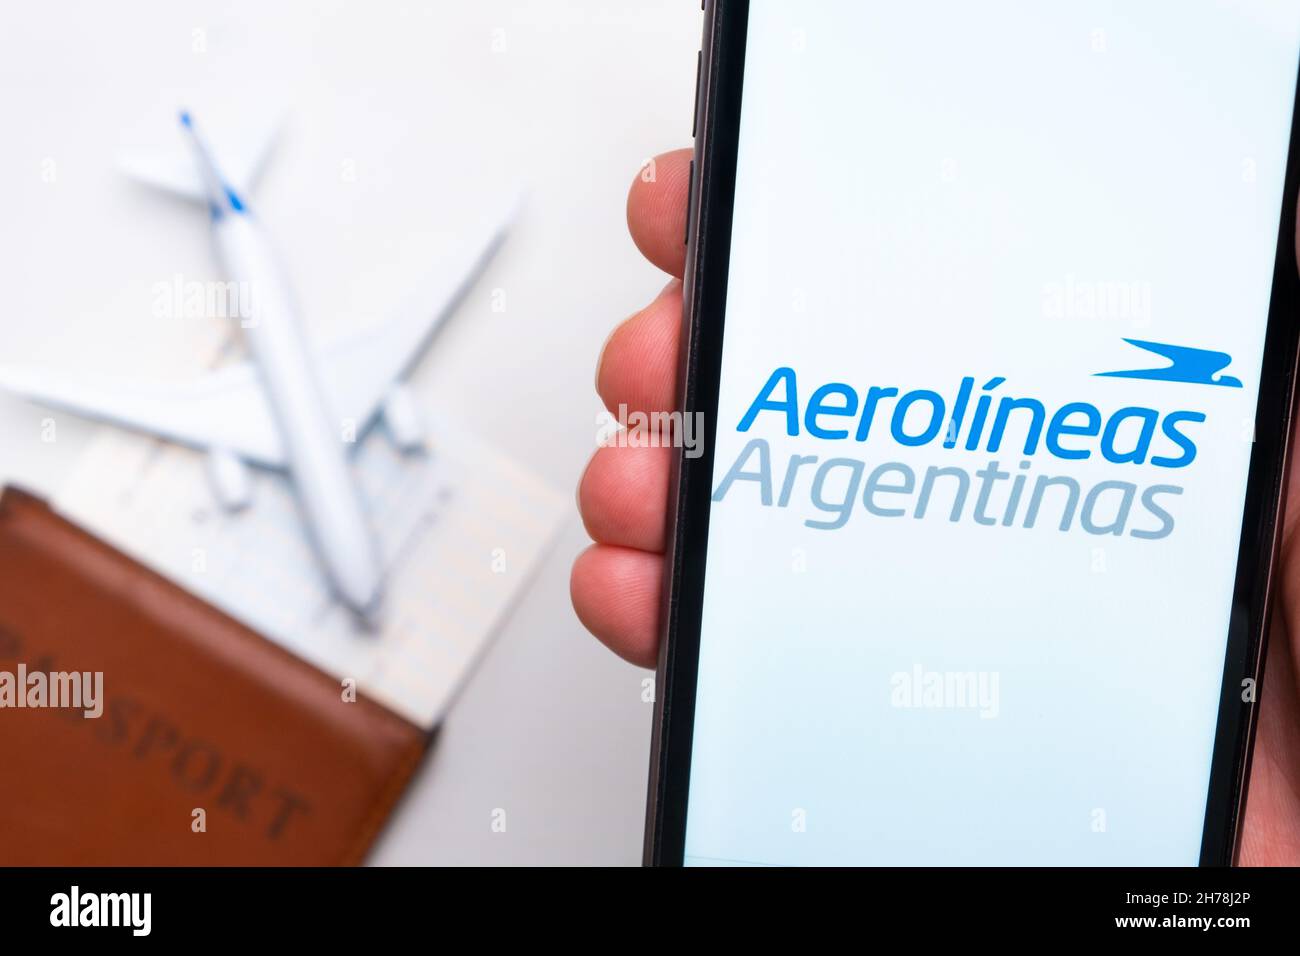 Aerolineas Argentinas Airline application on the screen of mobile phone in mans hand. Passport, boarding bass are next to a white plane on the background. November 2021, San Francisco, USA Stock Photo